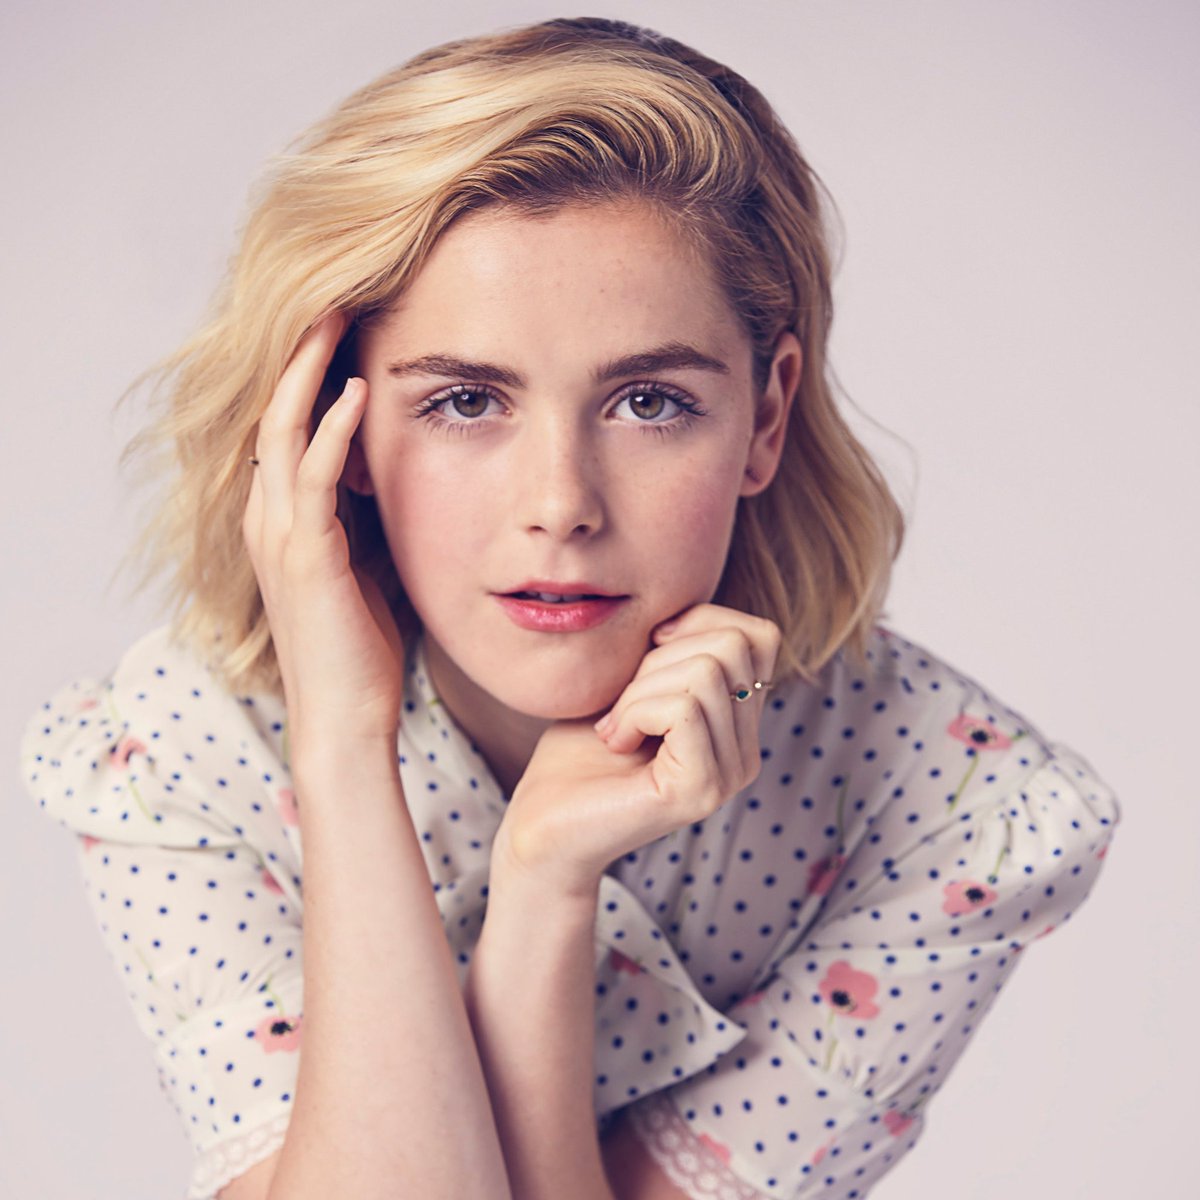 Kiernan Shipka has a role in Longlegs.

Carrie Anne is rumored to be mentally unstable. 

A strange man/visitor who sends her messages rebuilt her. 

She's protecting his identity from detectives.  

#LongLegs #Kiernanshipka